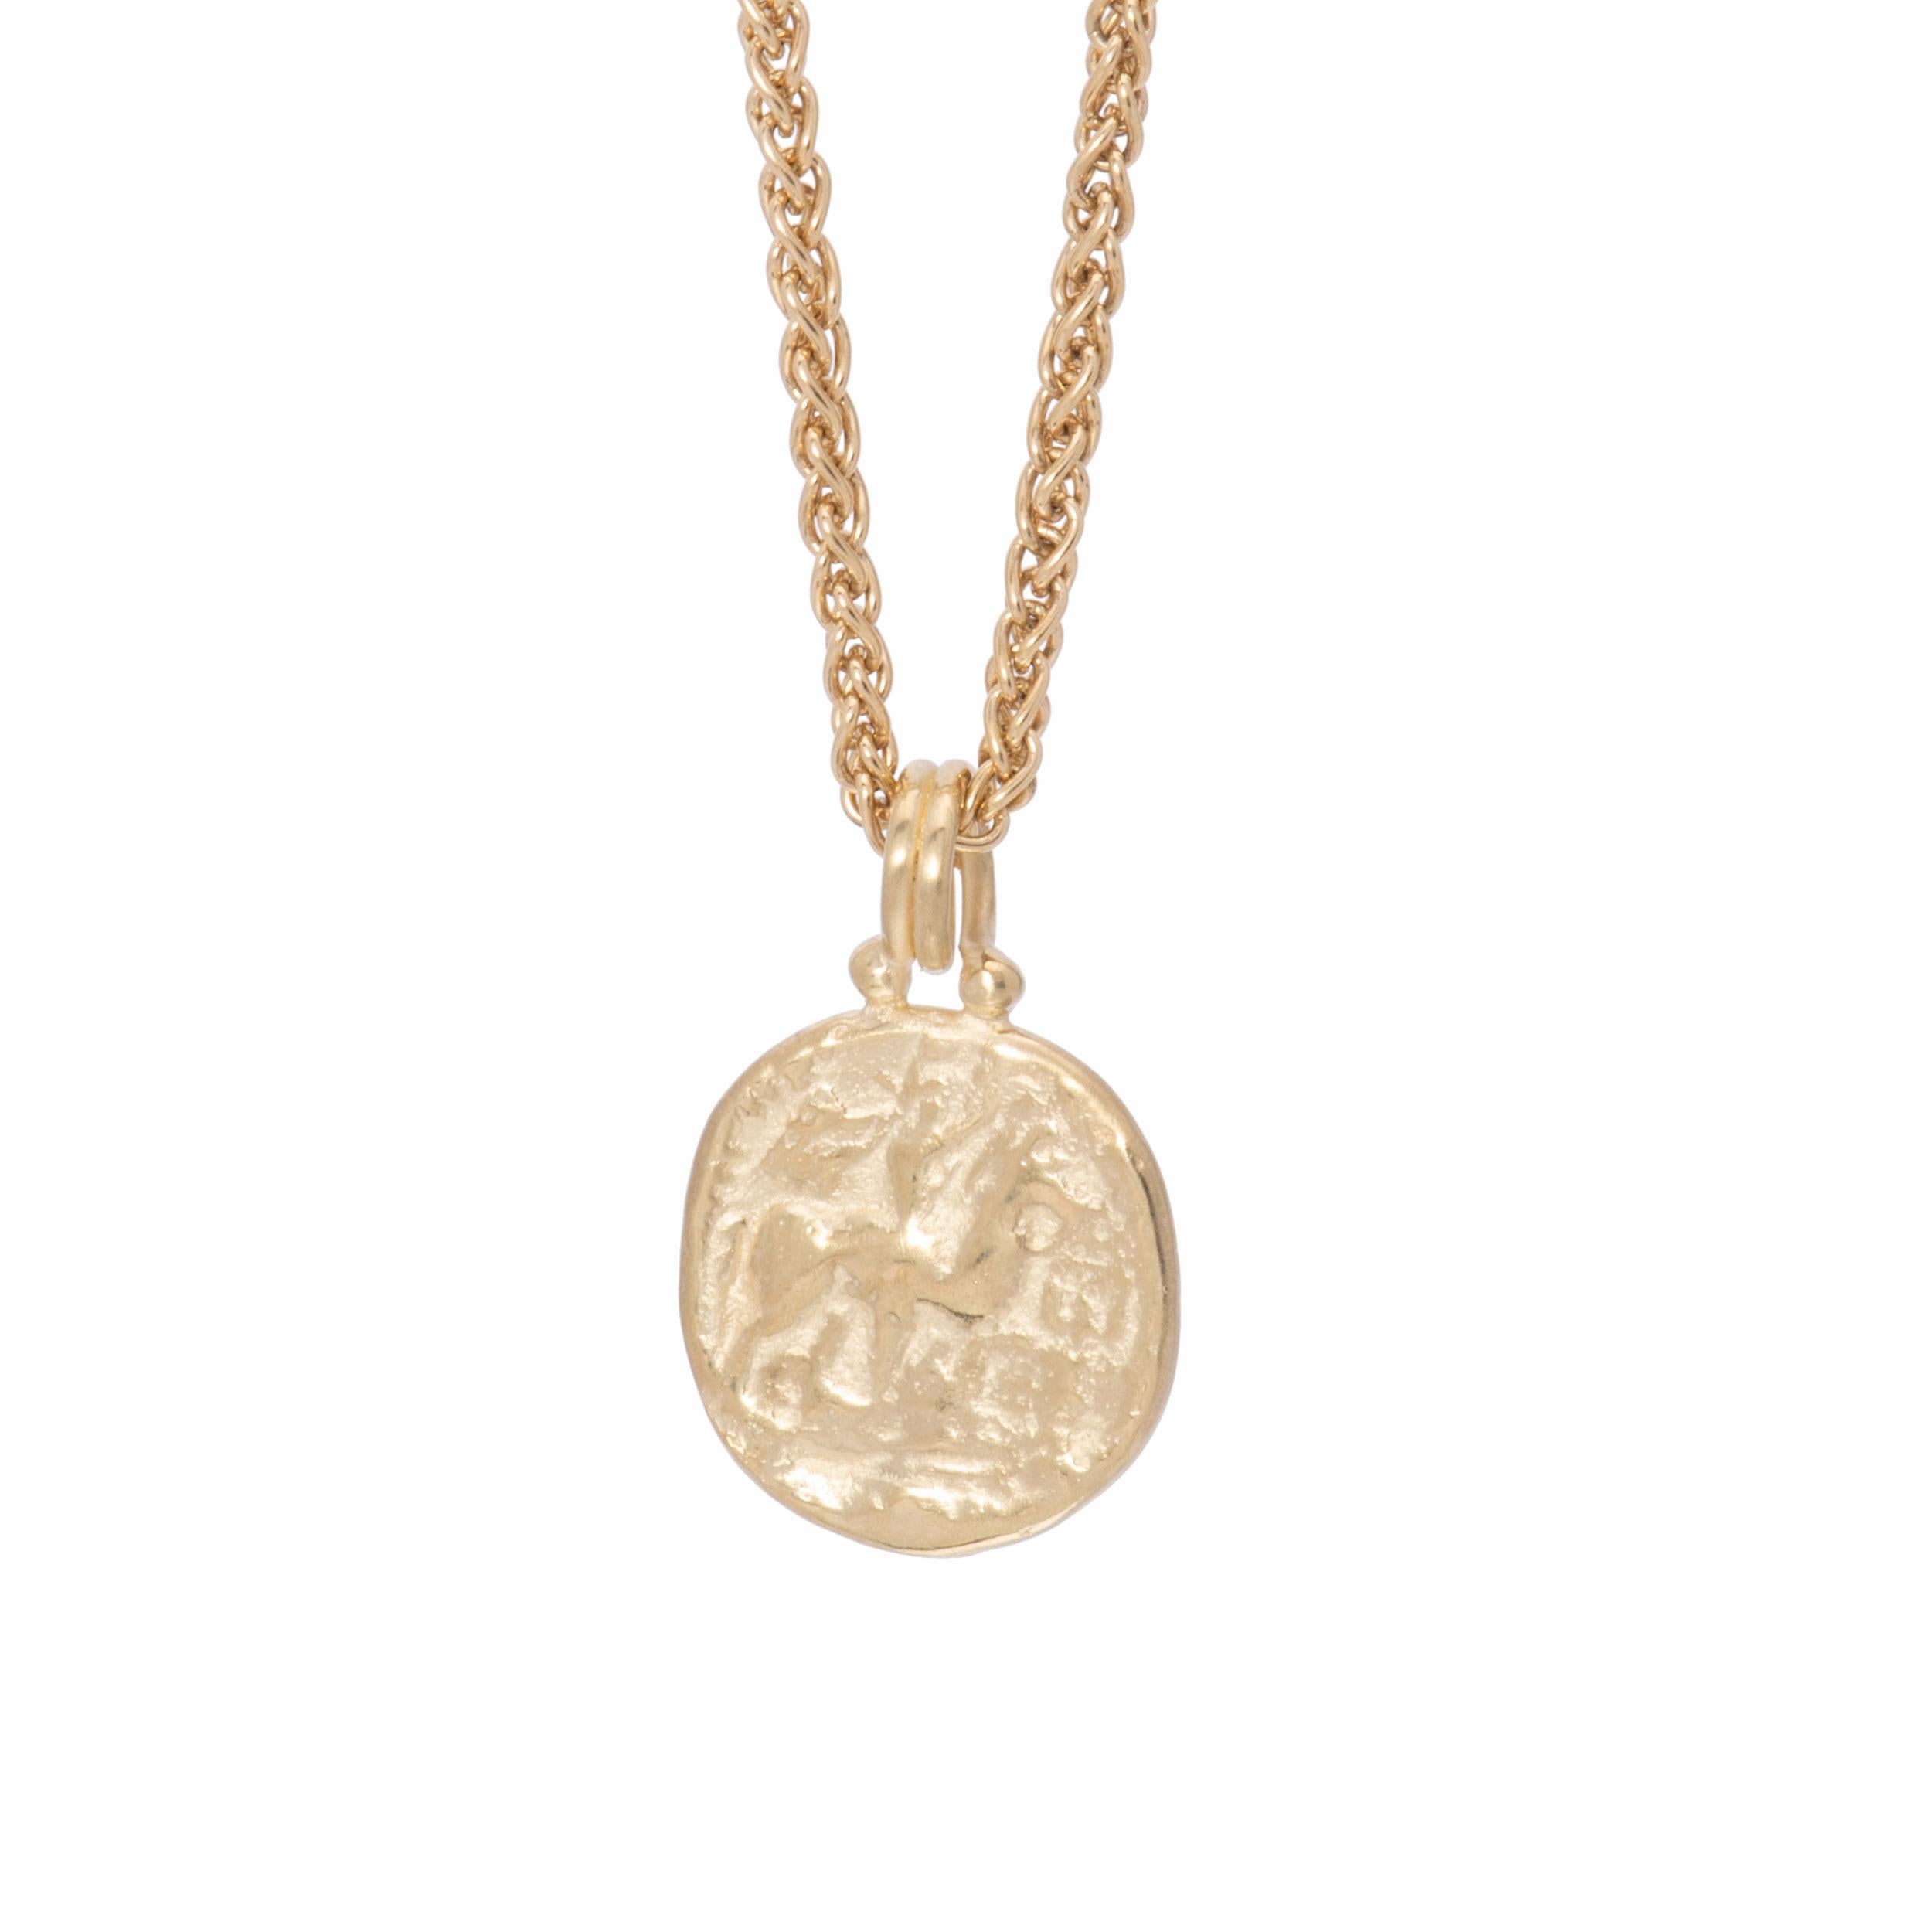 A classic equestrian profile of a horse and rider emerges from the background like an ancient coin. Indeed, the horse and rider pendant is a replica in 18k gold of an ancient coin, perhaps Greek or Persian in origin. Hand crafted in our studio of